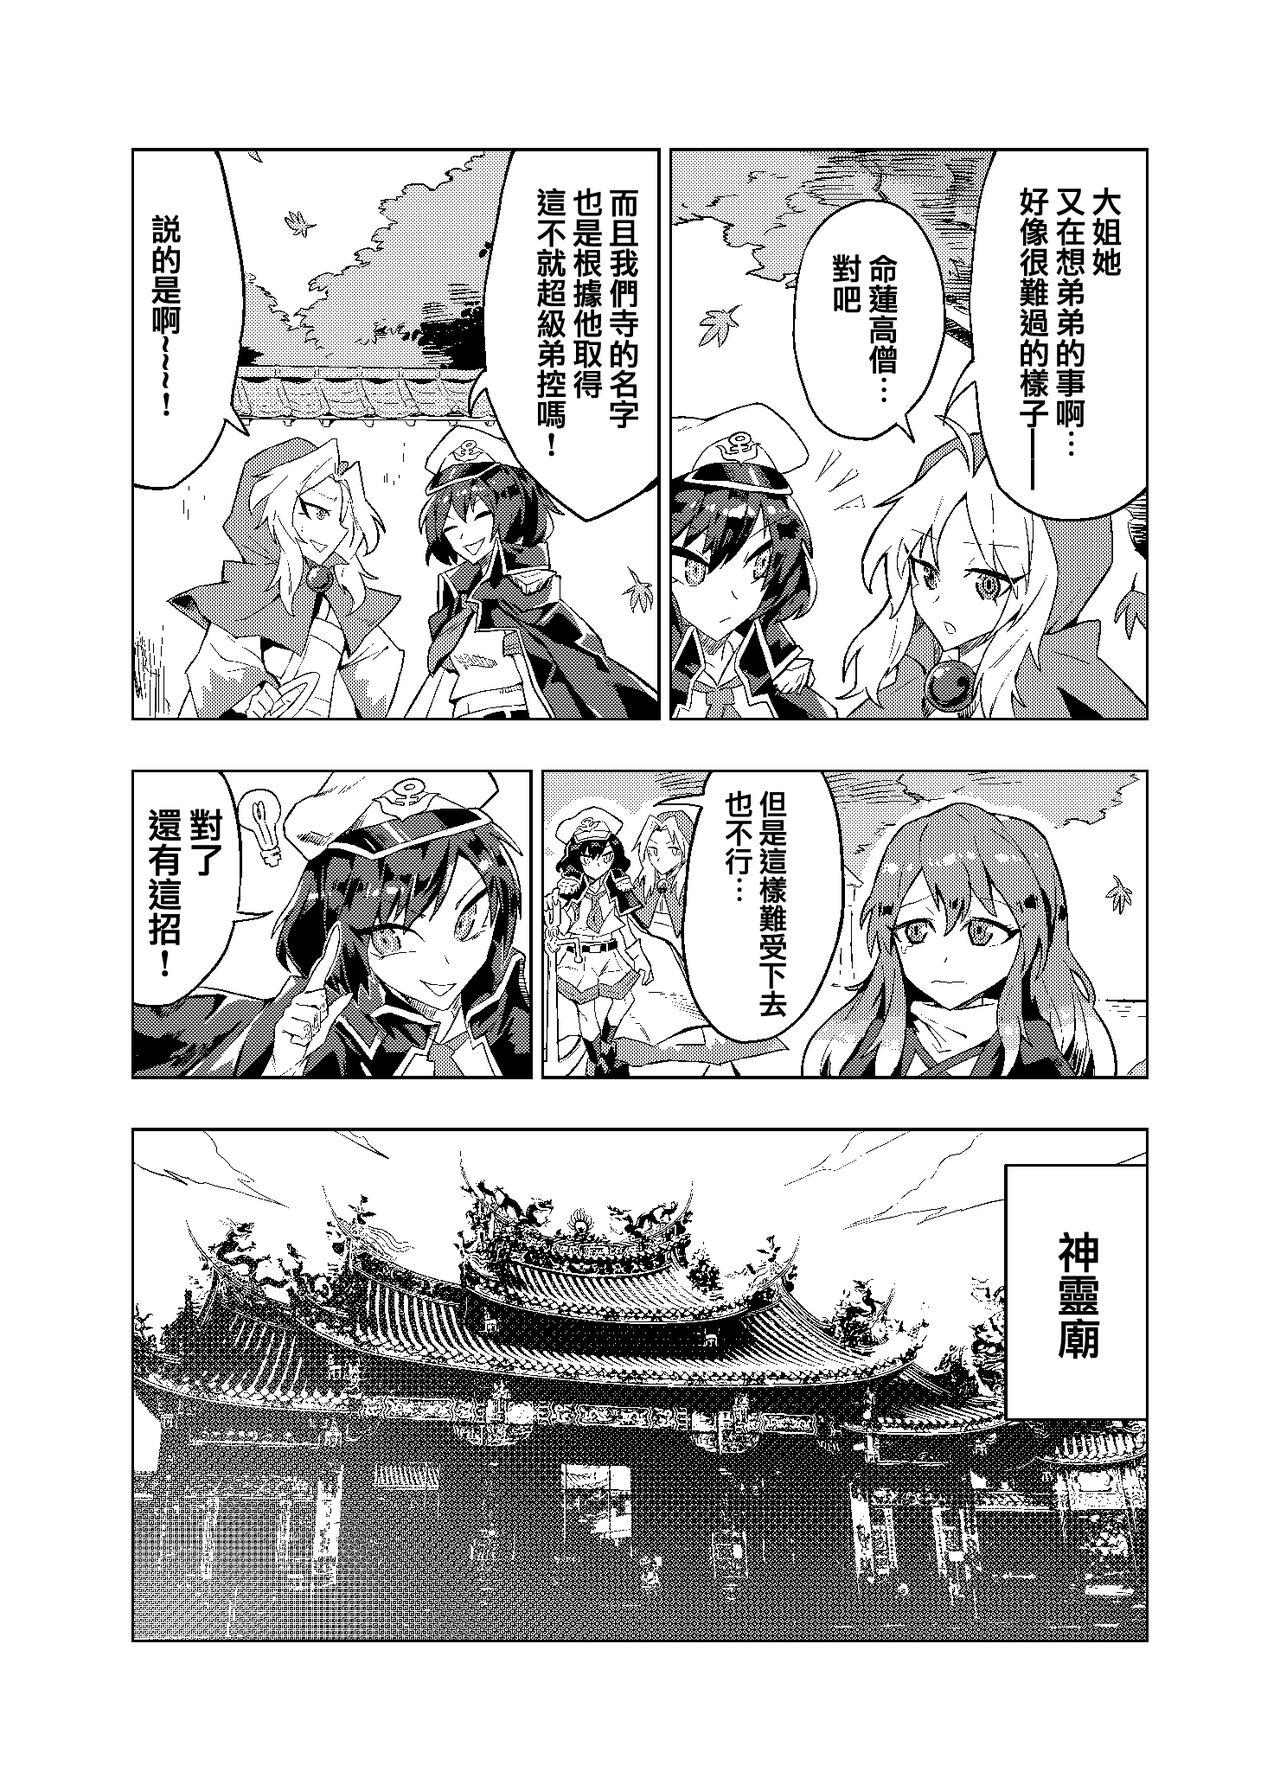 Free Fuck Clips 弟控圣和换装太子（Touhou Project） - Touhou project Jacking - Page 4